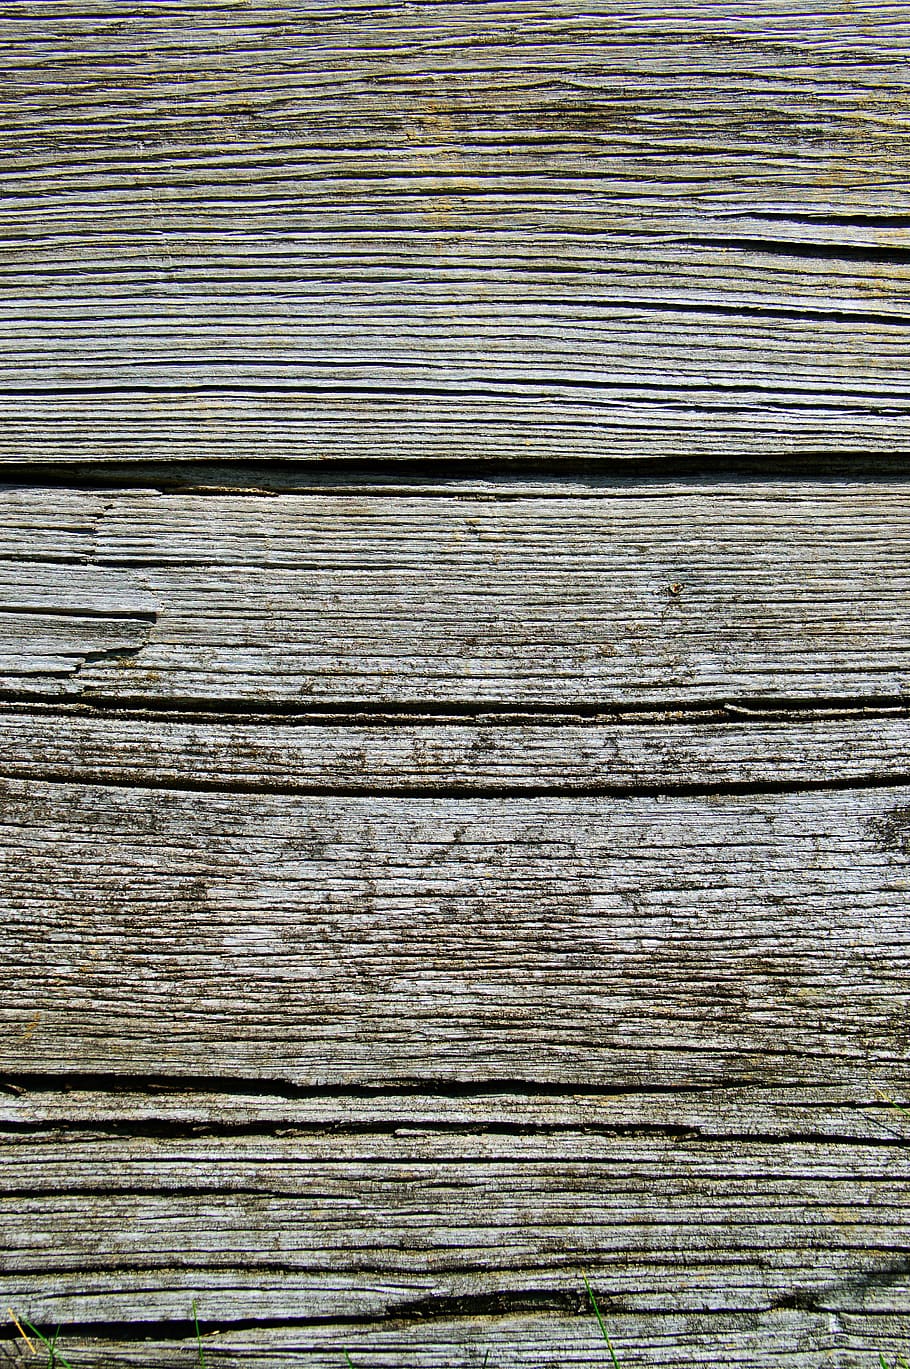 old, wood, worn, weathered, antique, tribe, boards, nature, structure, wooden structure